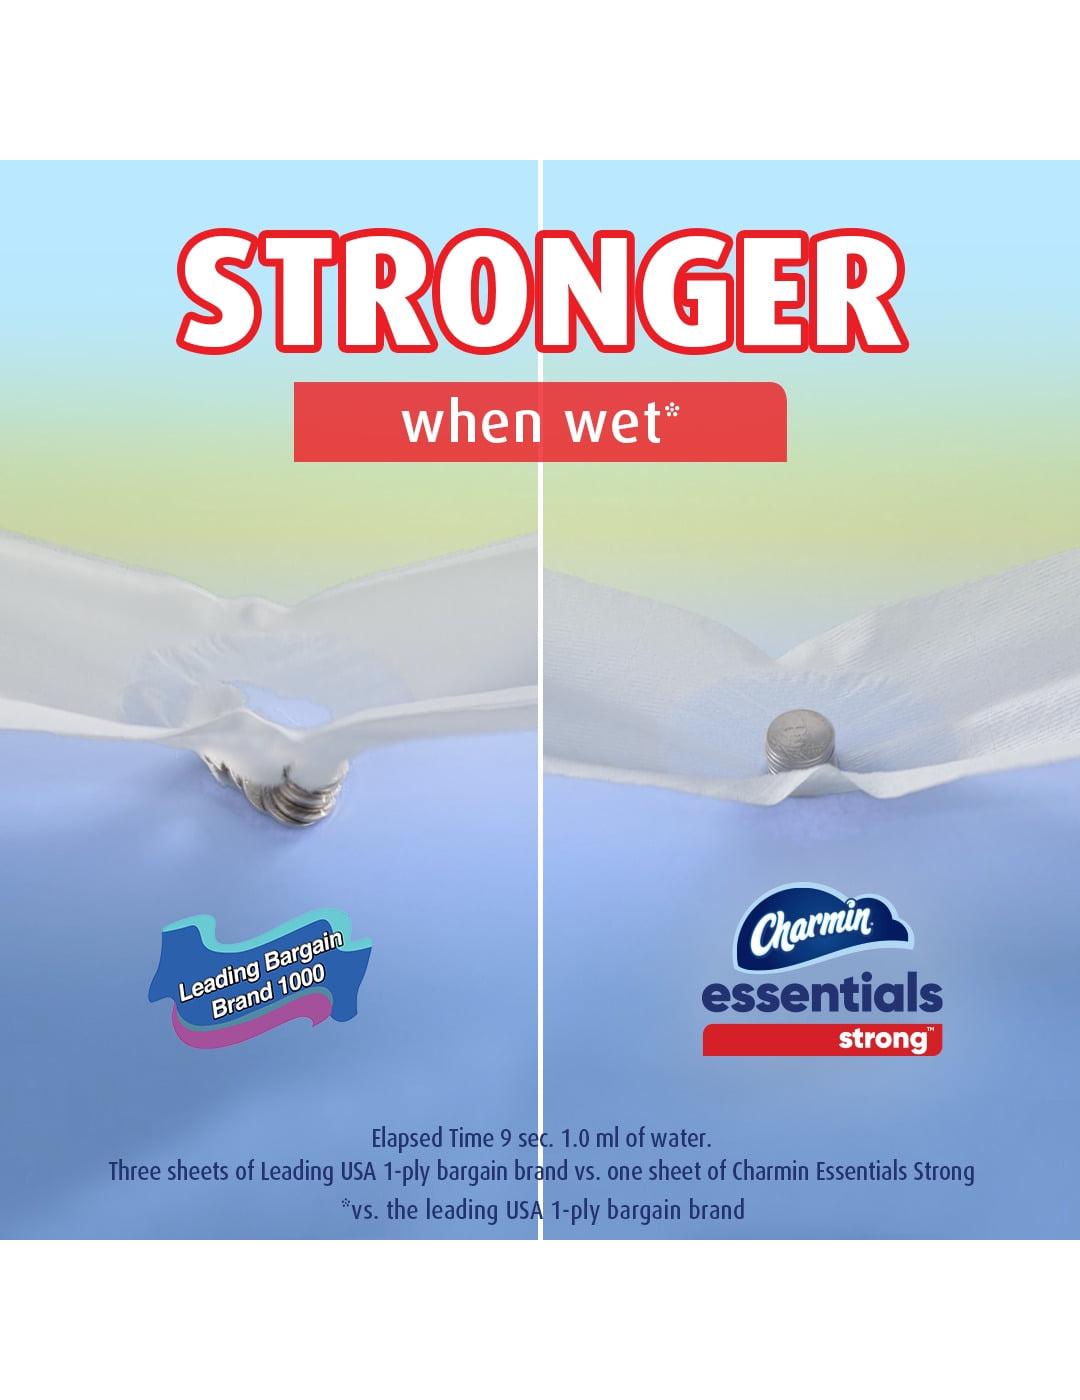 Charmin Essentials Strong Toilet Paper; image 6 of 6